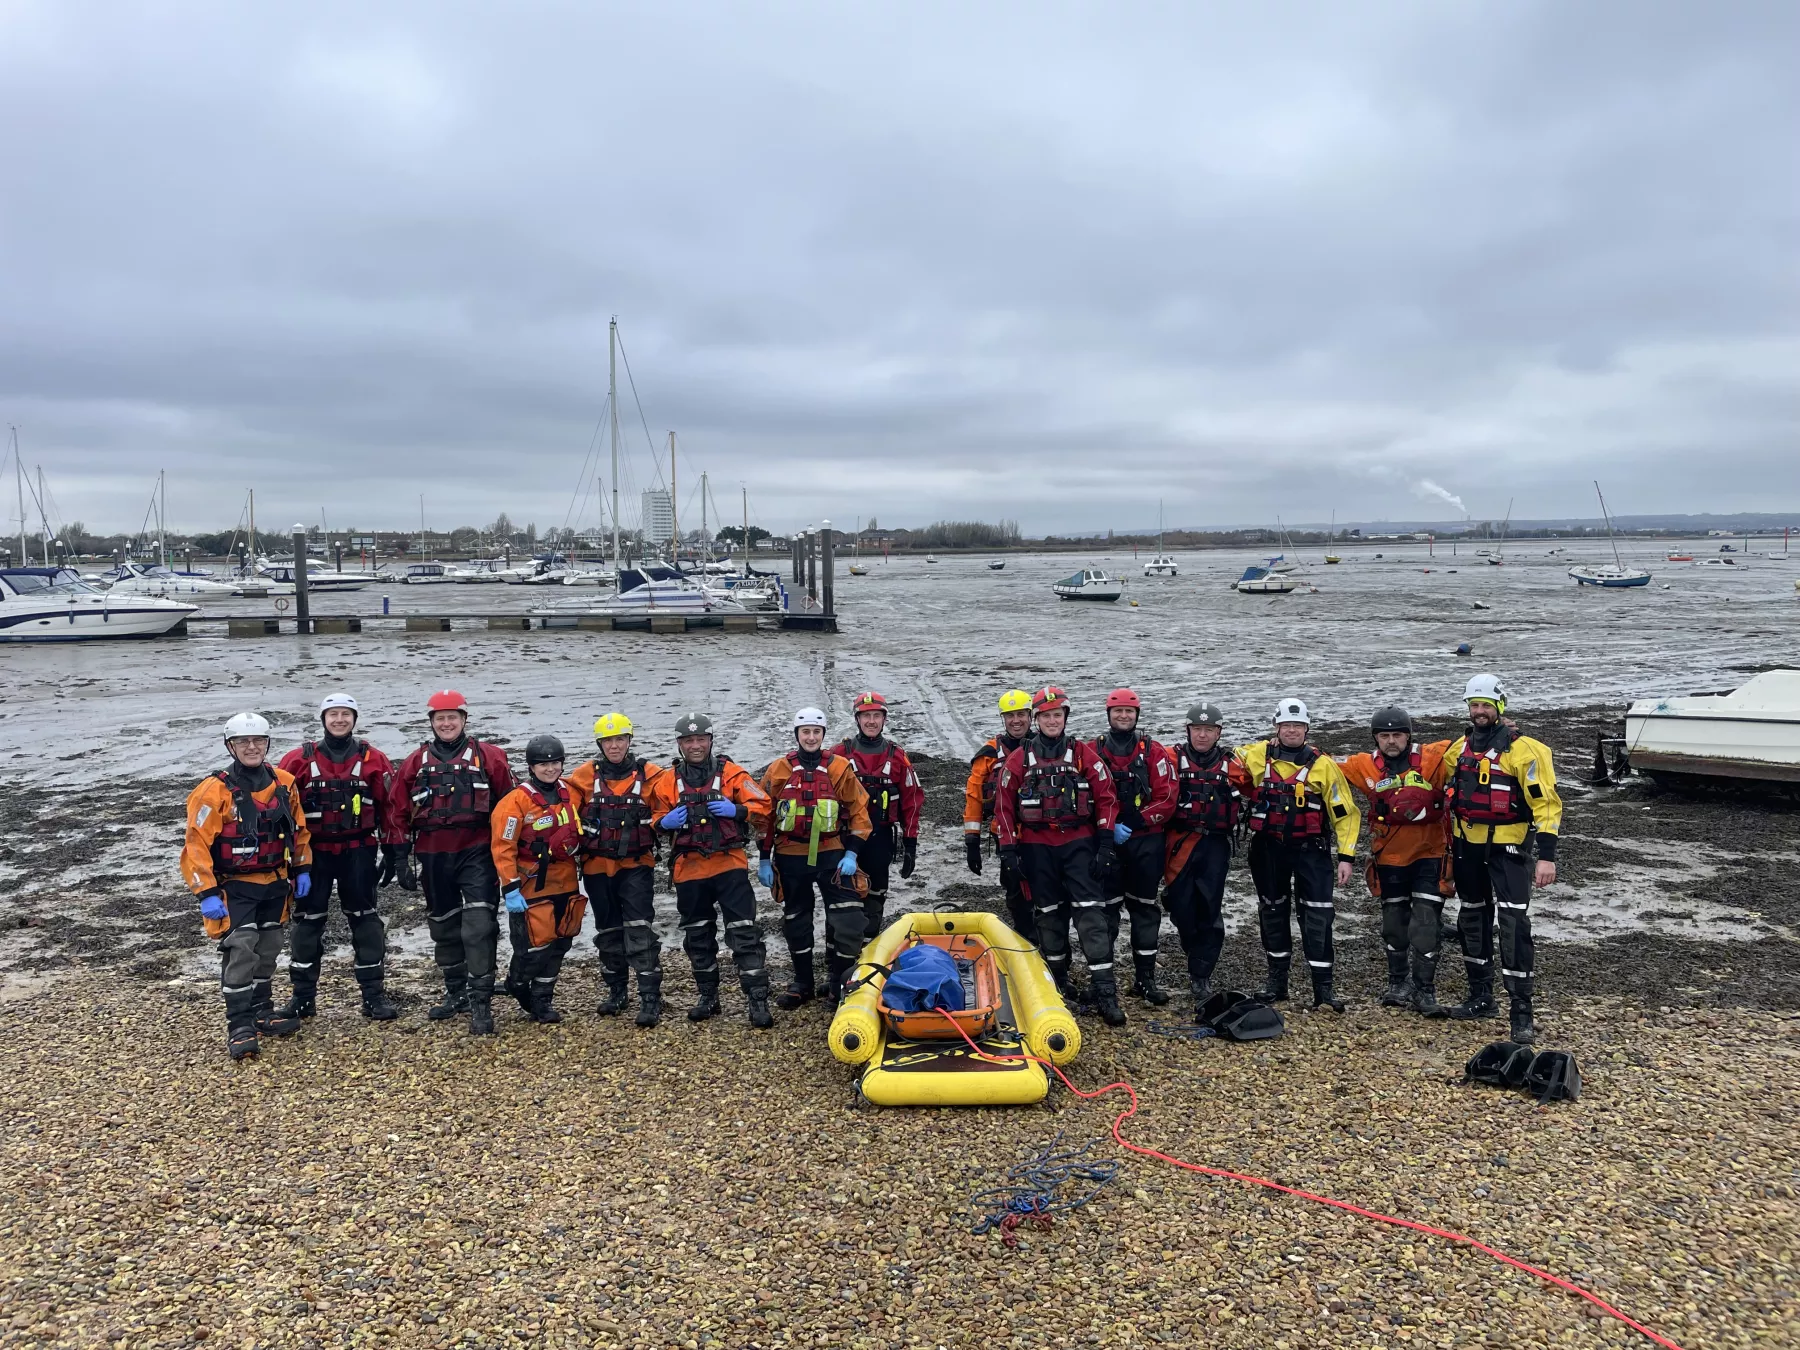 Members of HM Coastguard and Hampshire and Isle of Wight Fire and Rescue Service smiling for a group photo amidst sand and mud in Eastney, Portsmouth, equipped with mud rescue kit